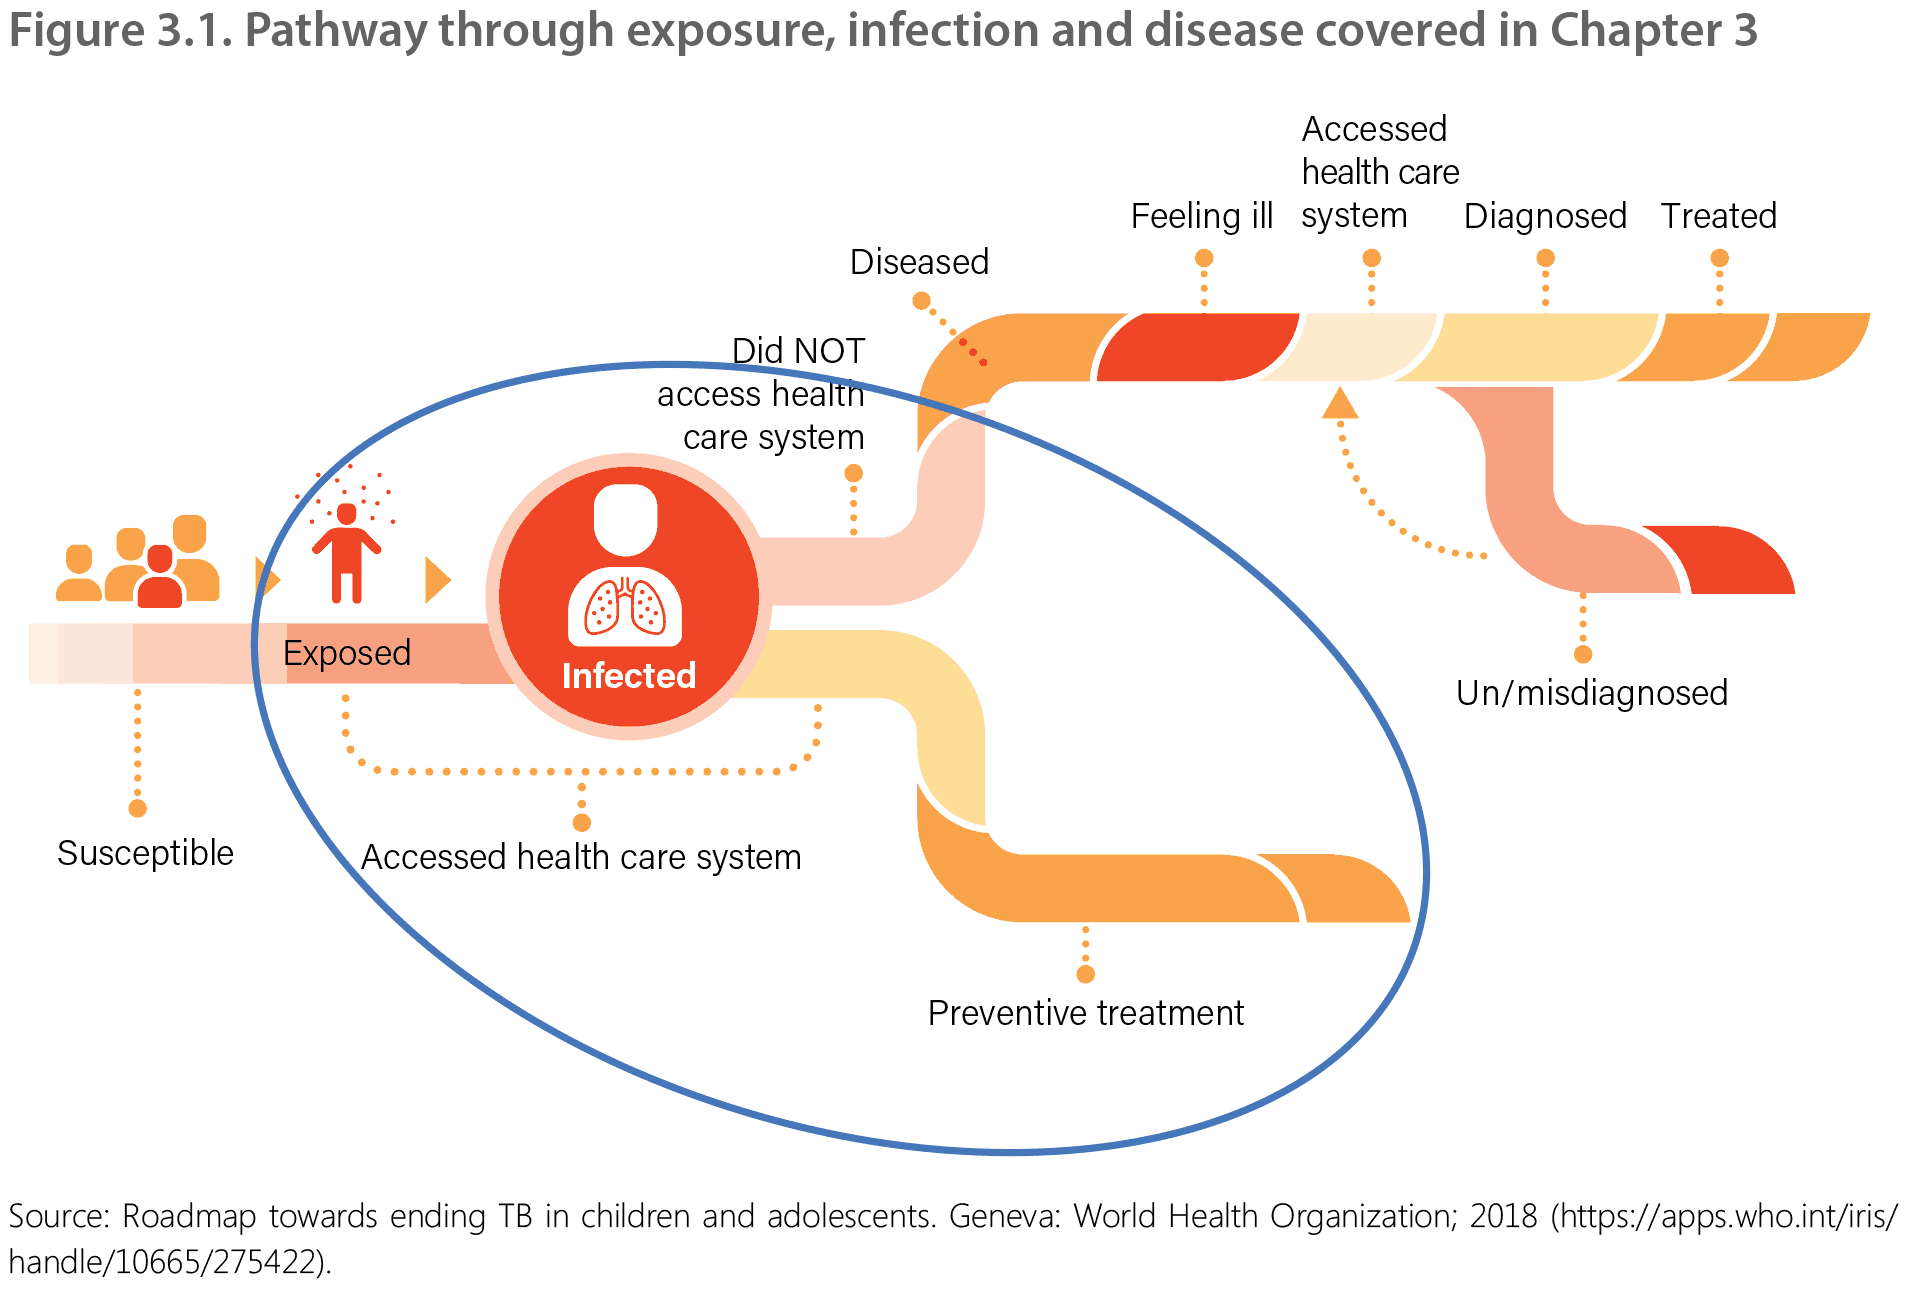 Figure 3.1. Pathway through exposure, infection and disease covered in Chapter 3